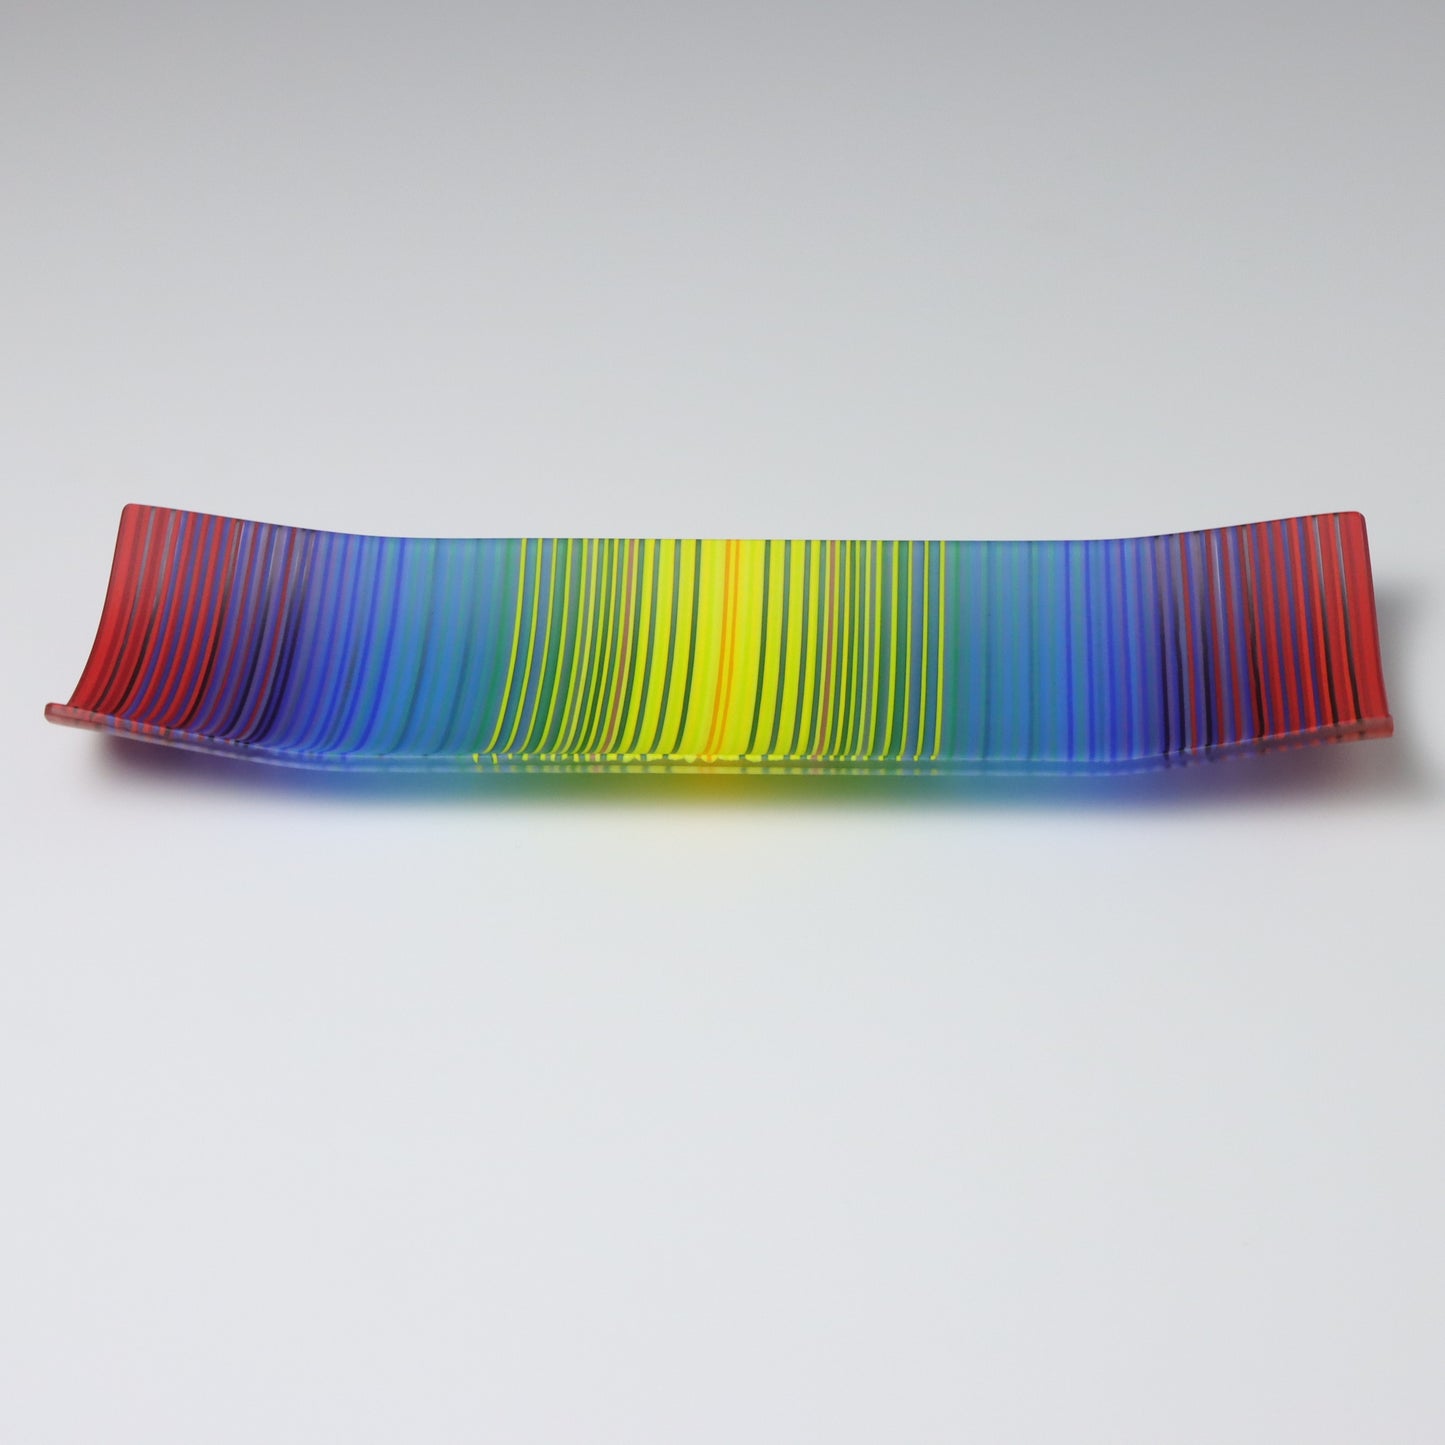 A decorative shallow rectangular boat shaped glass plate with raised corners and a  colourful ColourWave stripe patterns showing key colours of bold red, blue, green and yellow